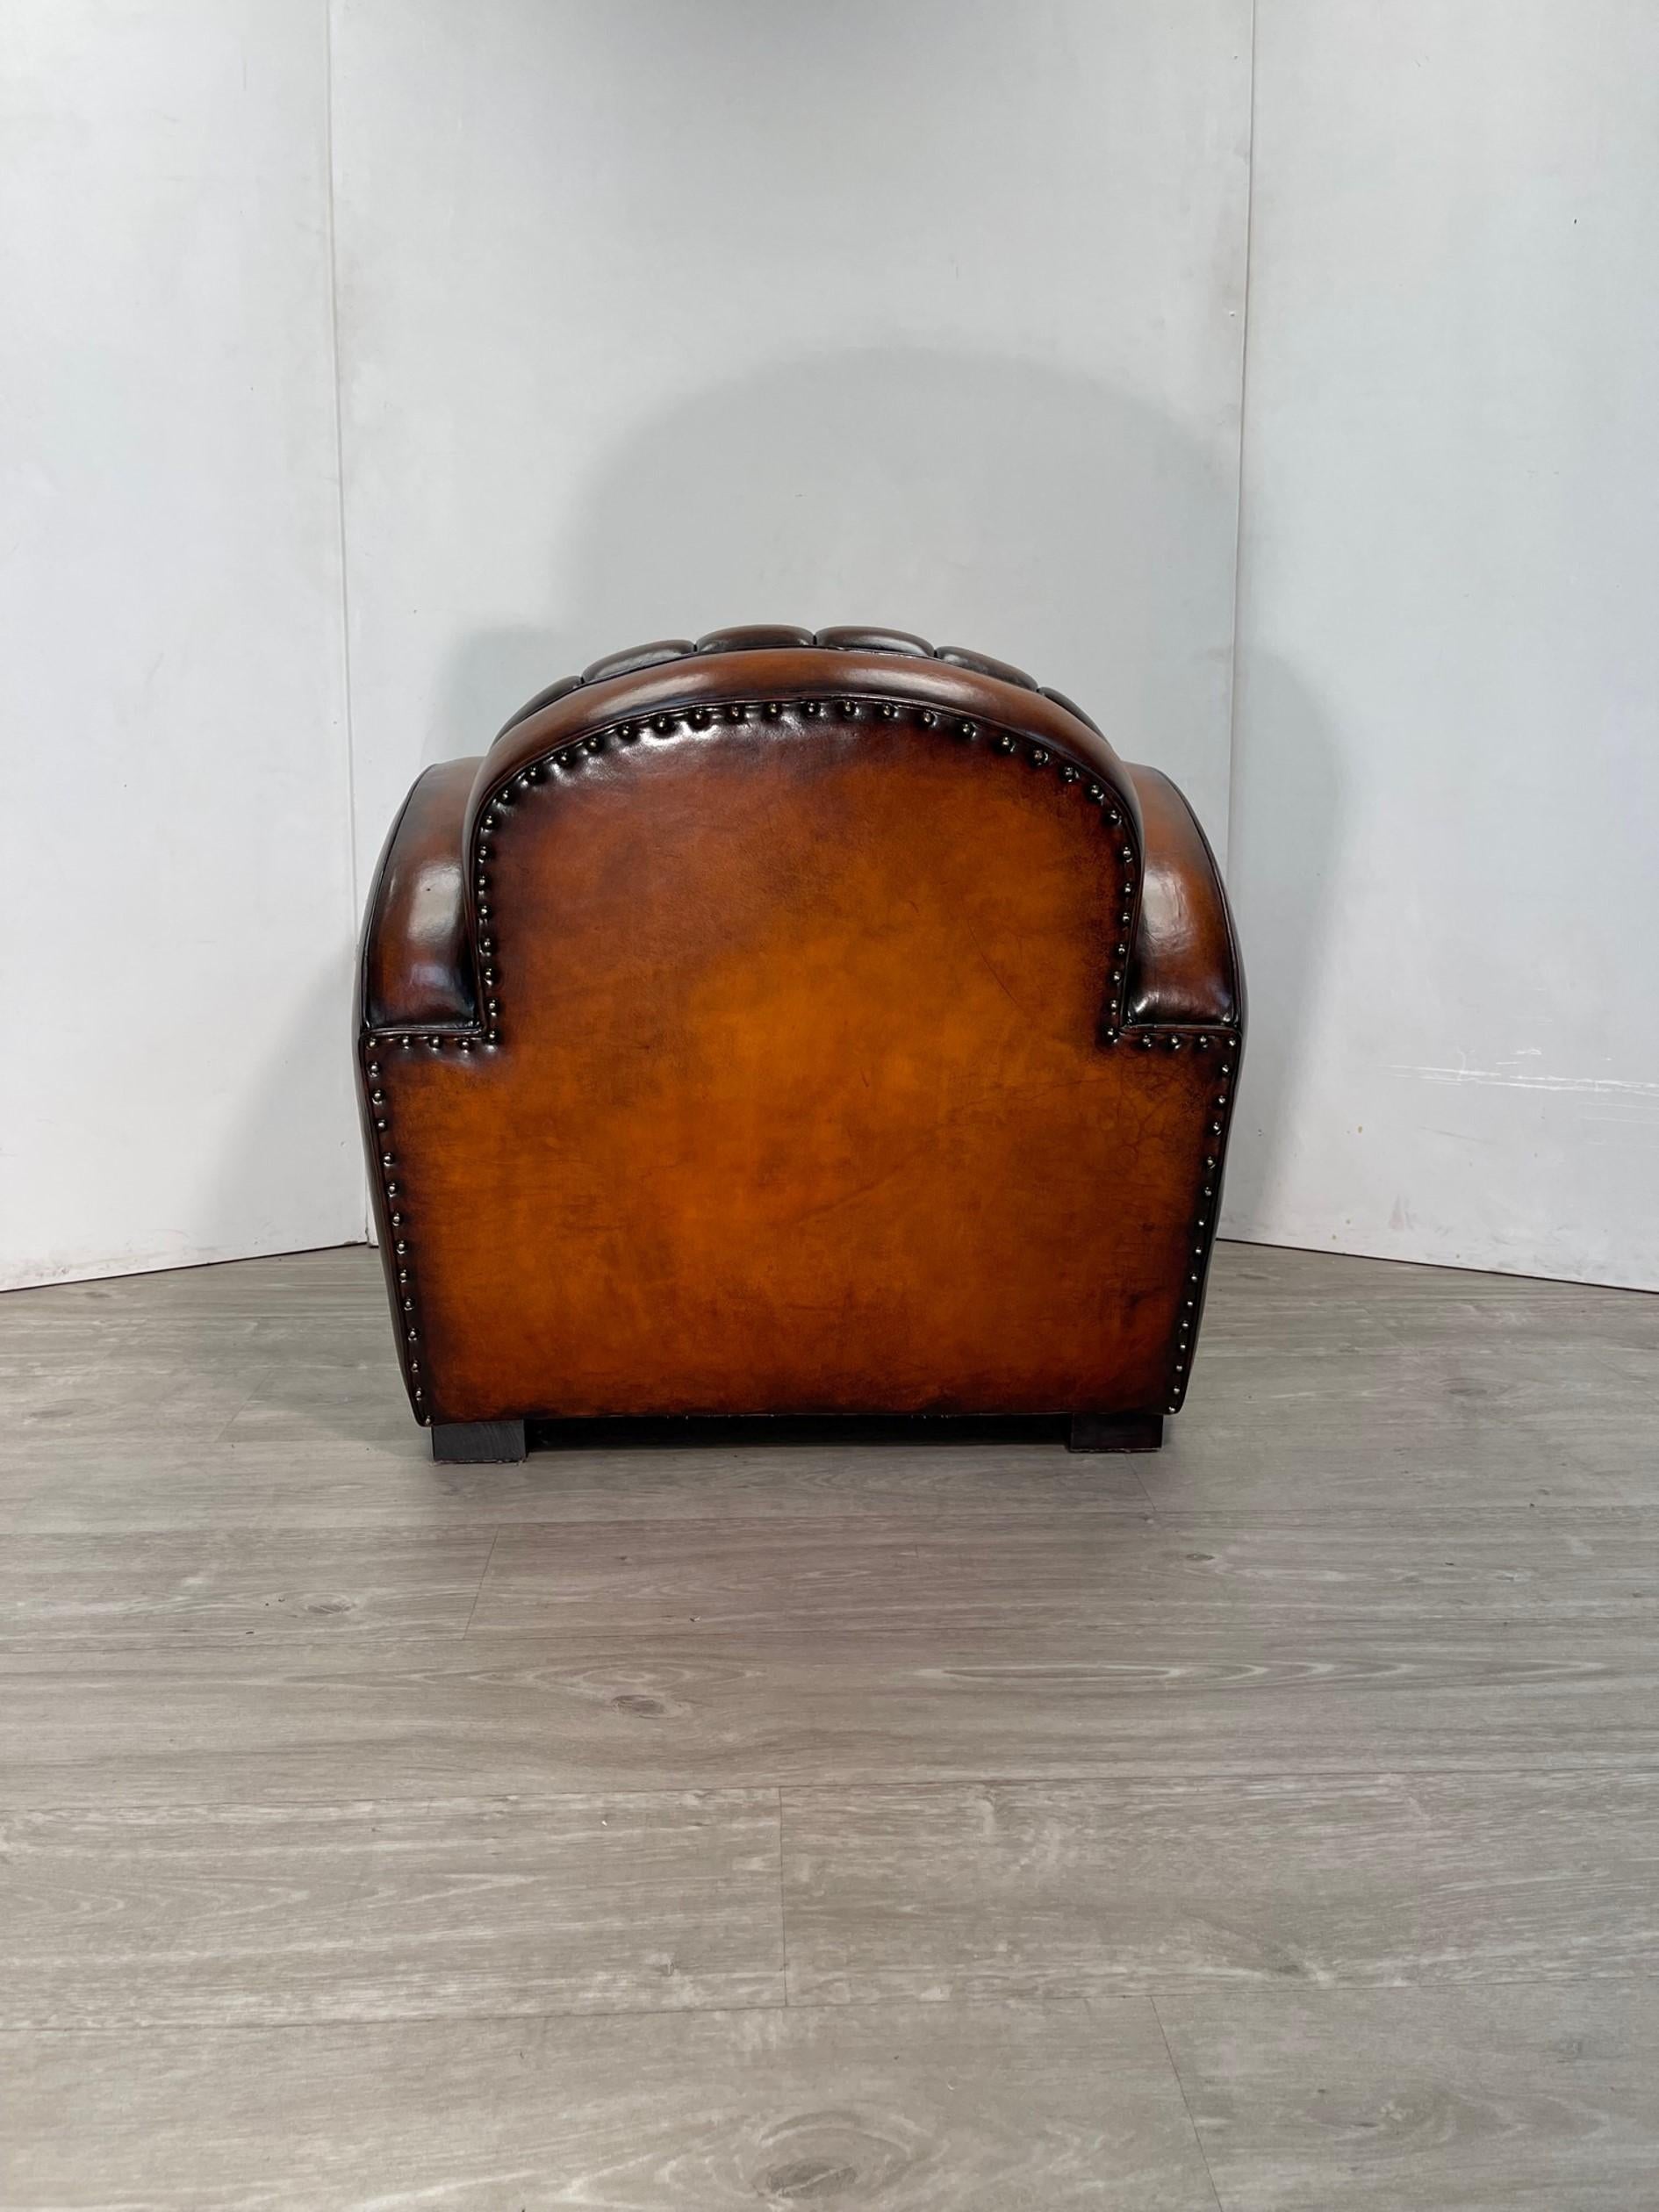 Art Deco Rare Vintage Mustang Car Seat Armchair Based on the 1966 Fastback Brown Leather